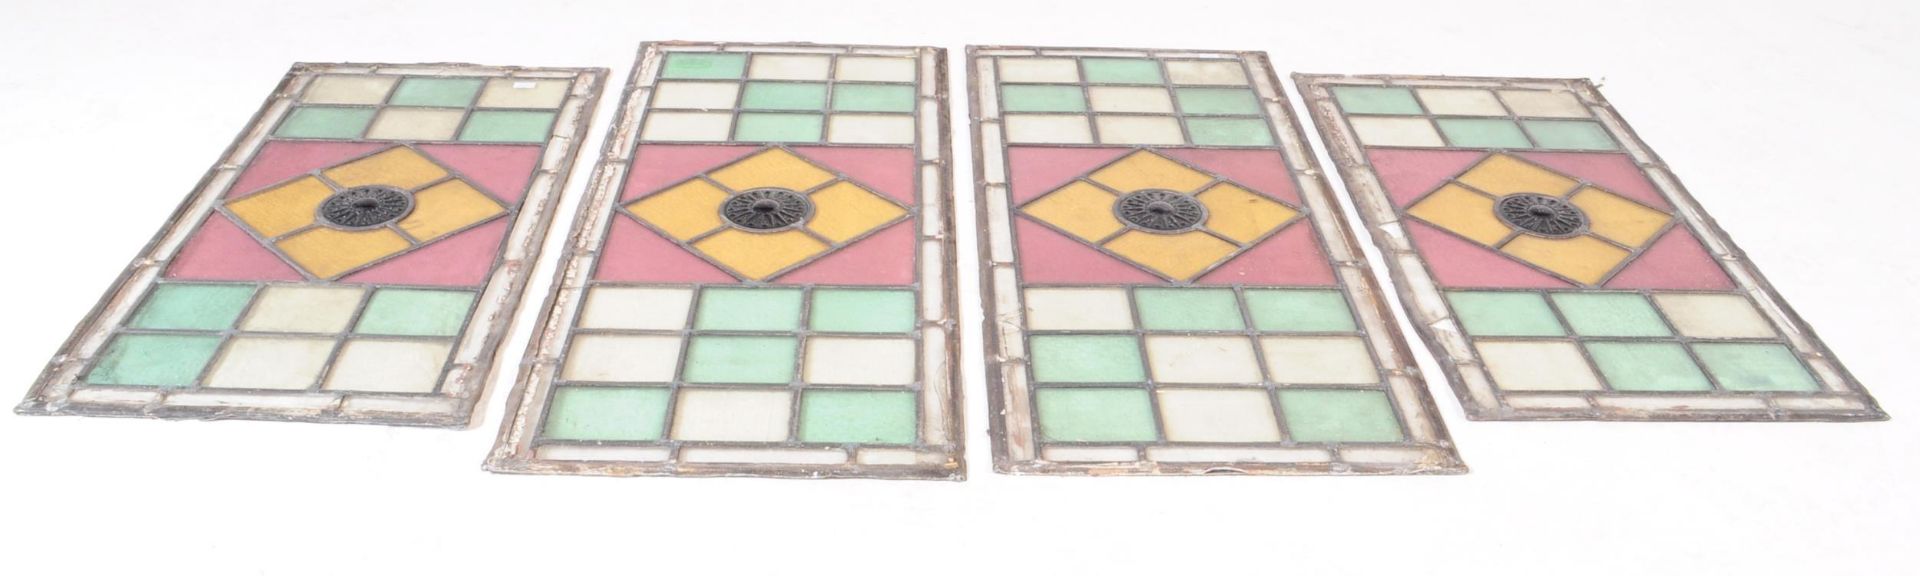 COLLECTION OF FOUR LEADED STAINED GLASS WINDOW PANELS - Image 3 of 4